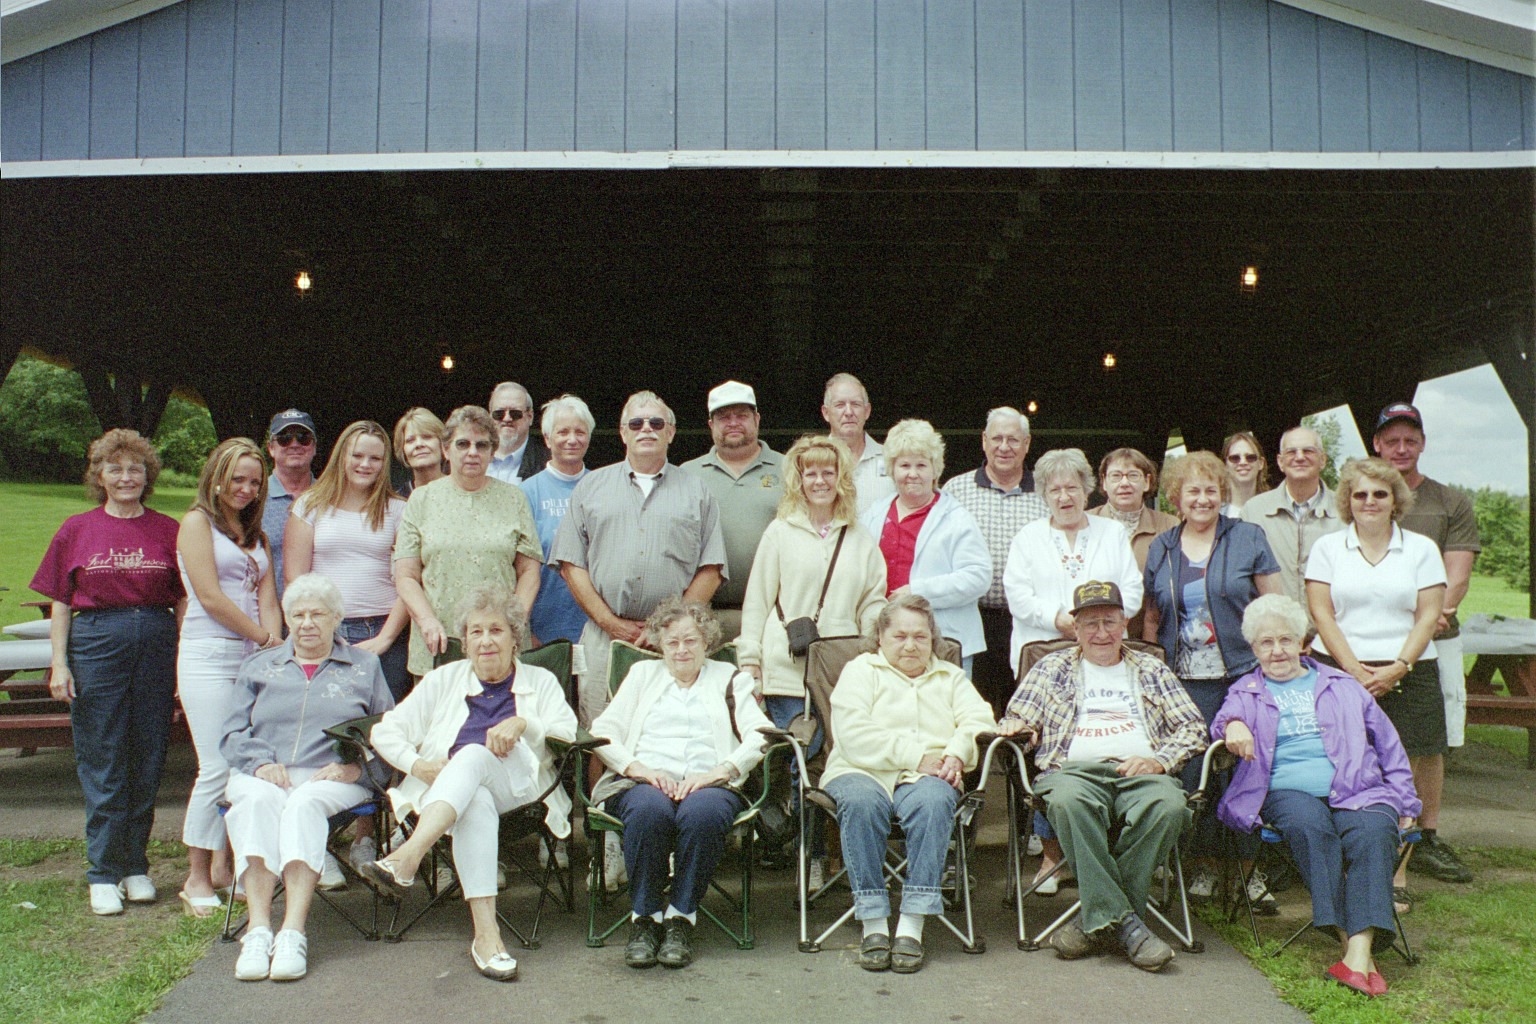 The 104th Dillenbeck Family Reunion